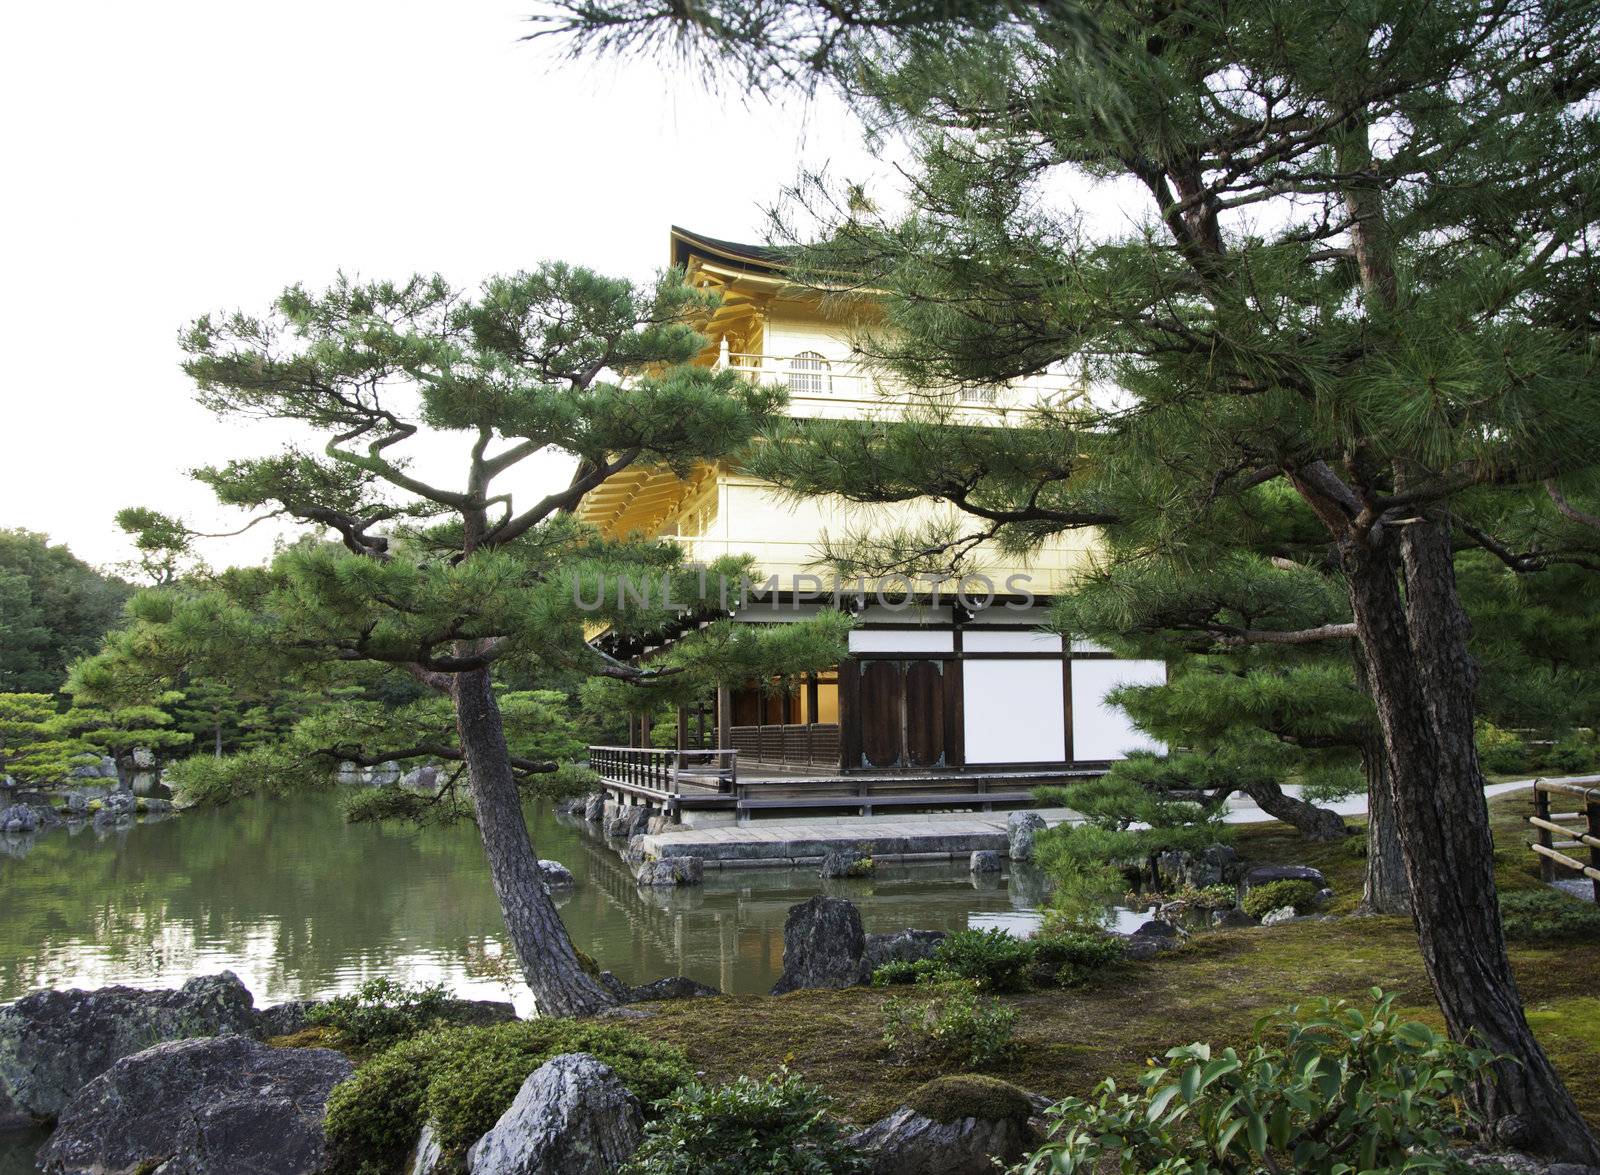 Kinkakuji (Golden Pavilion) is a Zen temple in northern Kyoto whose top two floors are completely covered in gold leaf. 